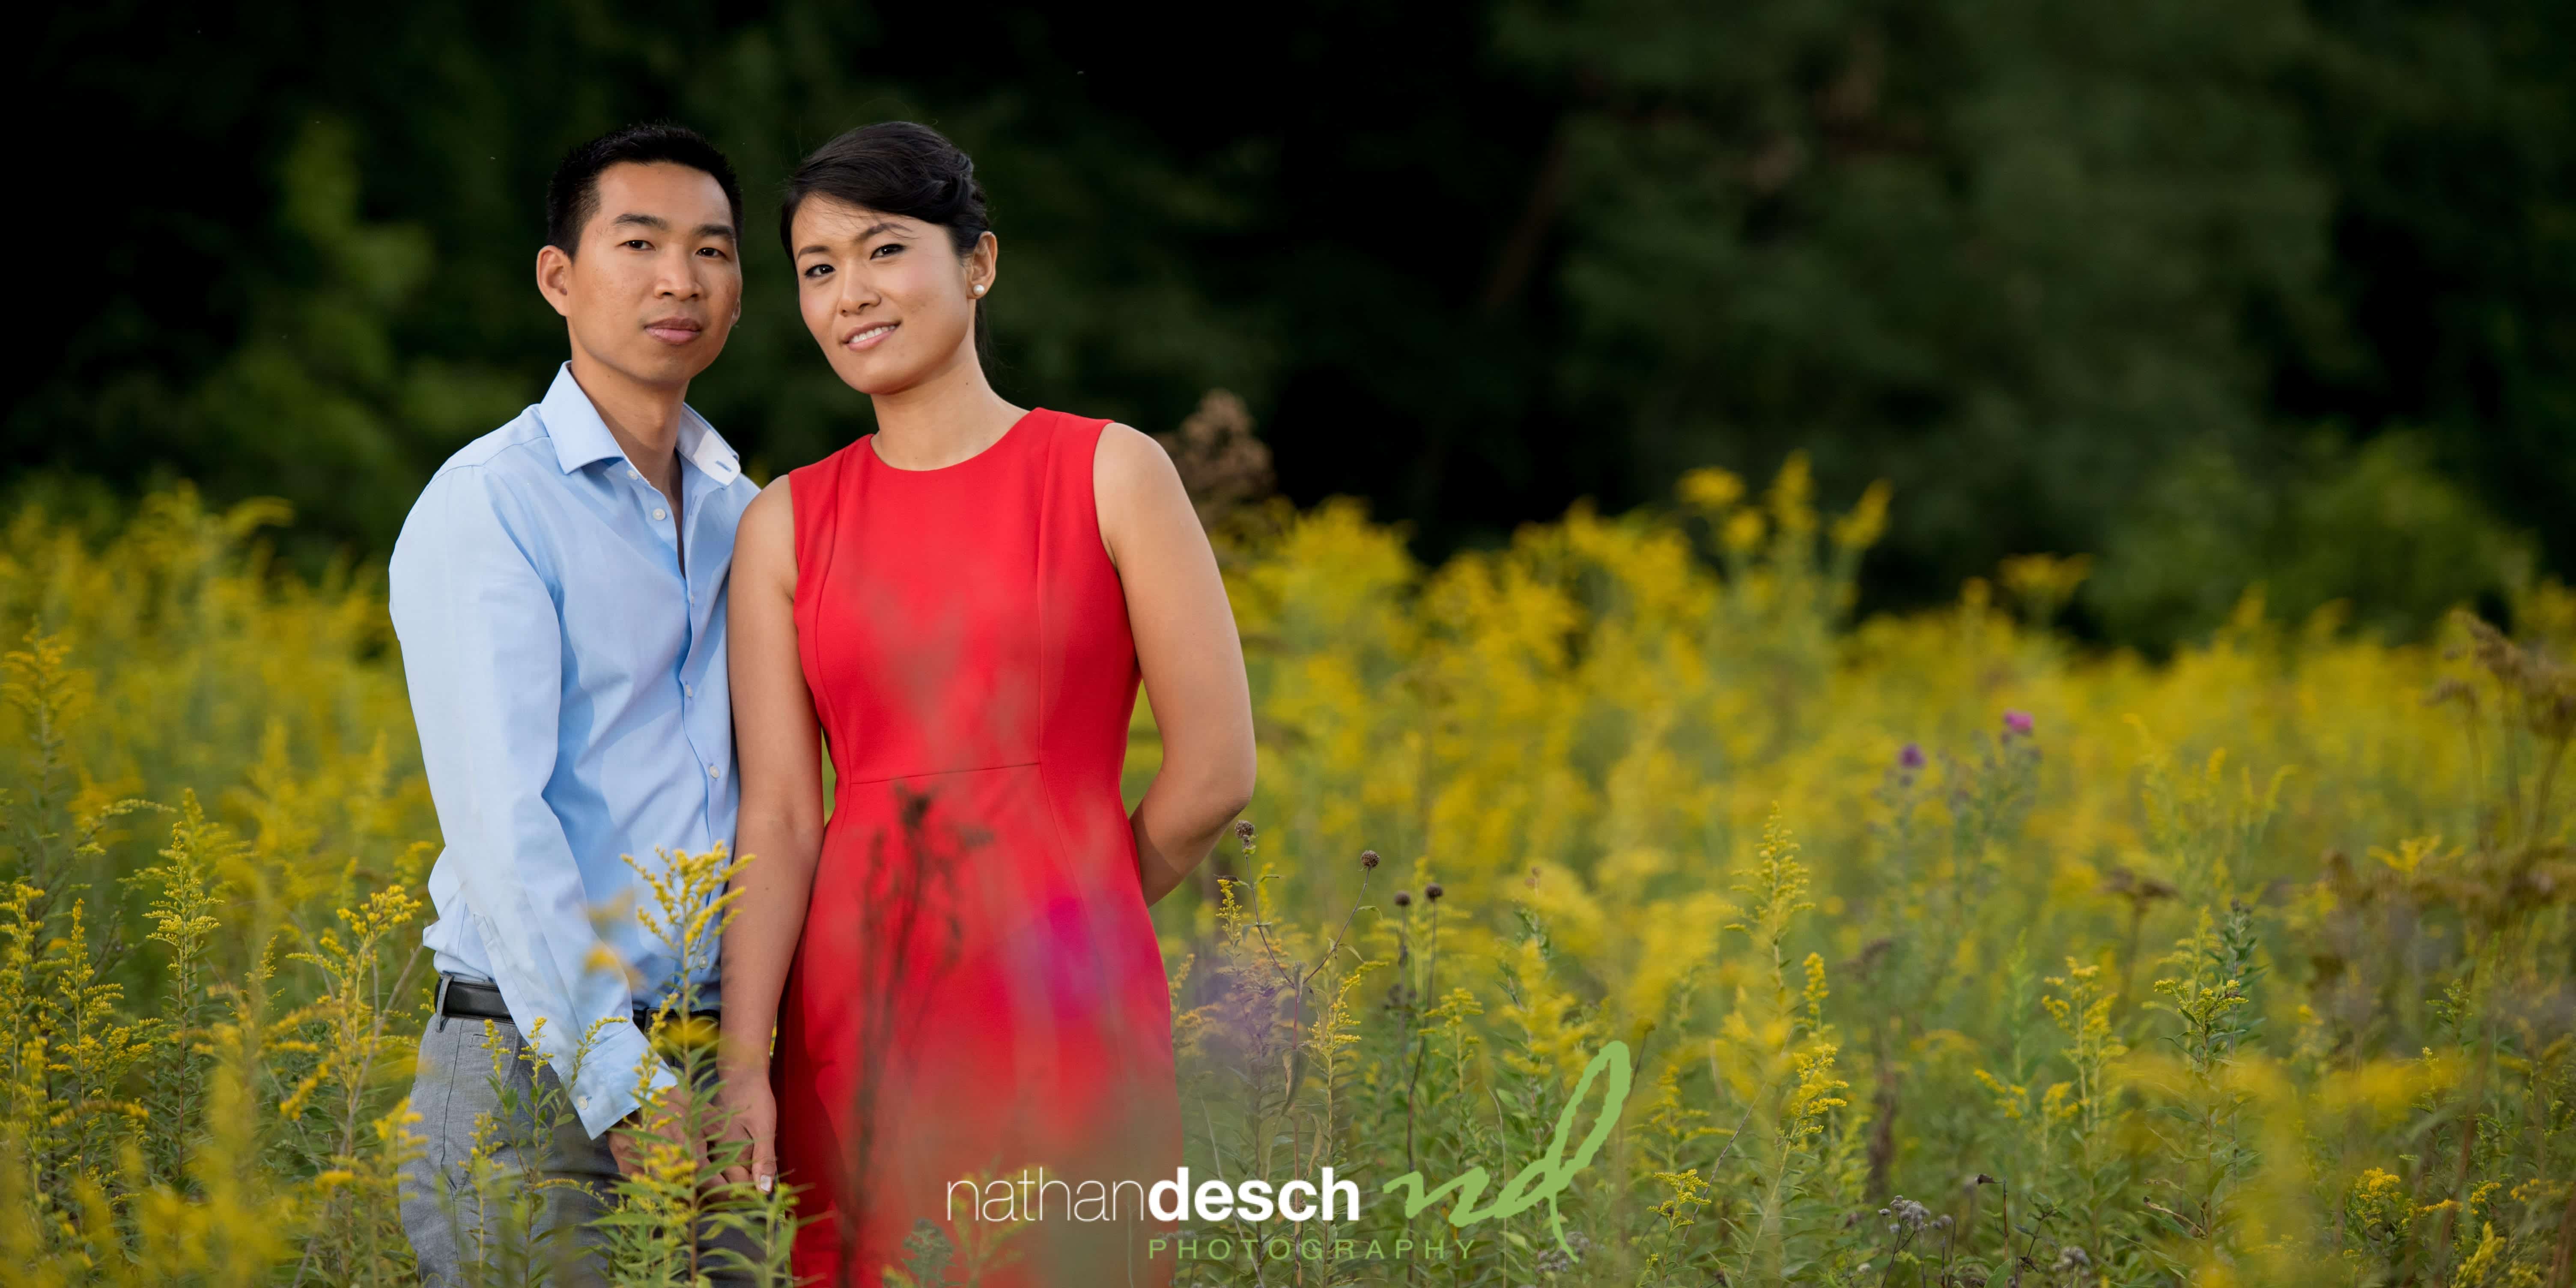 Longwood Gardens Engagement Pictures